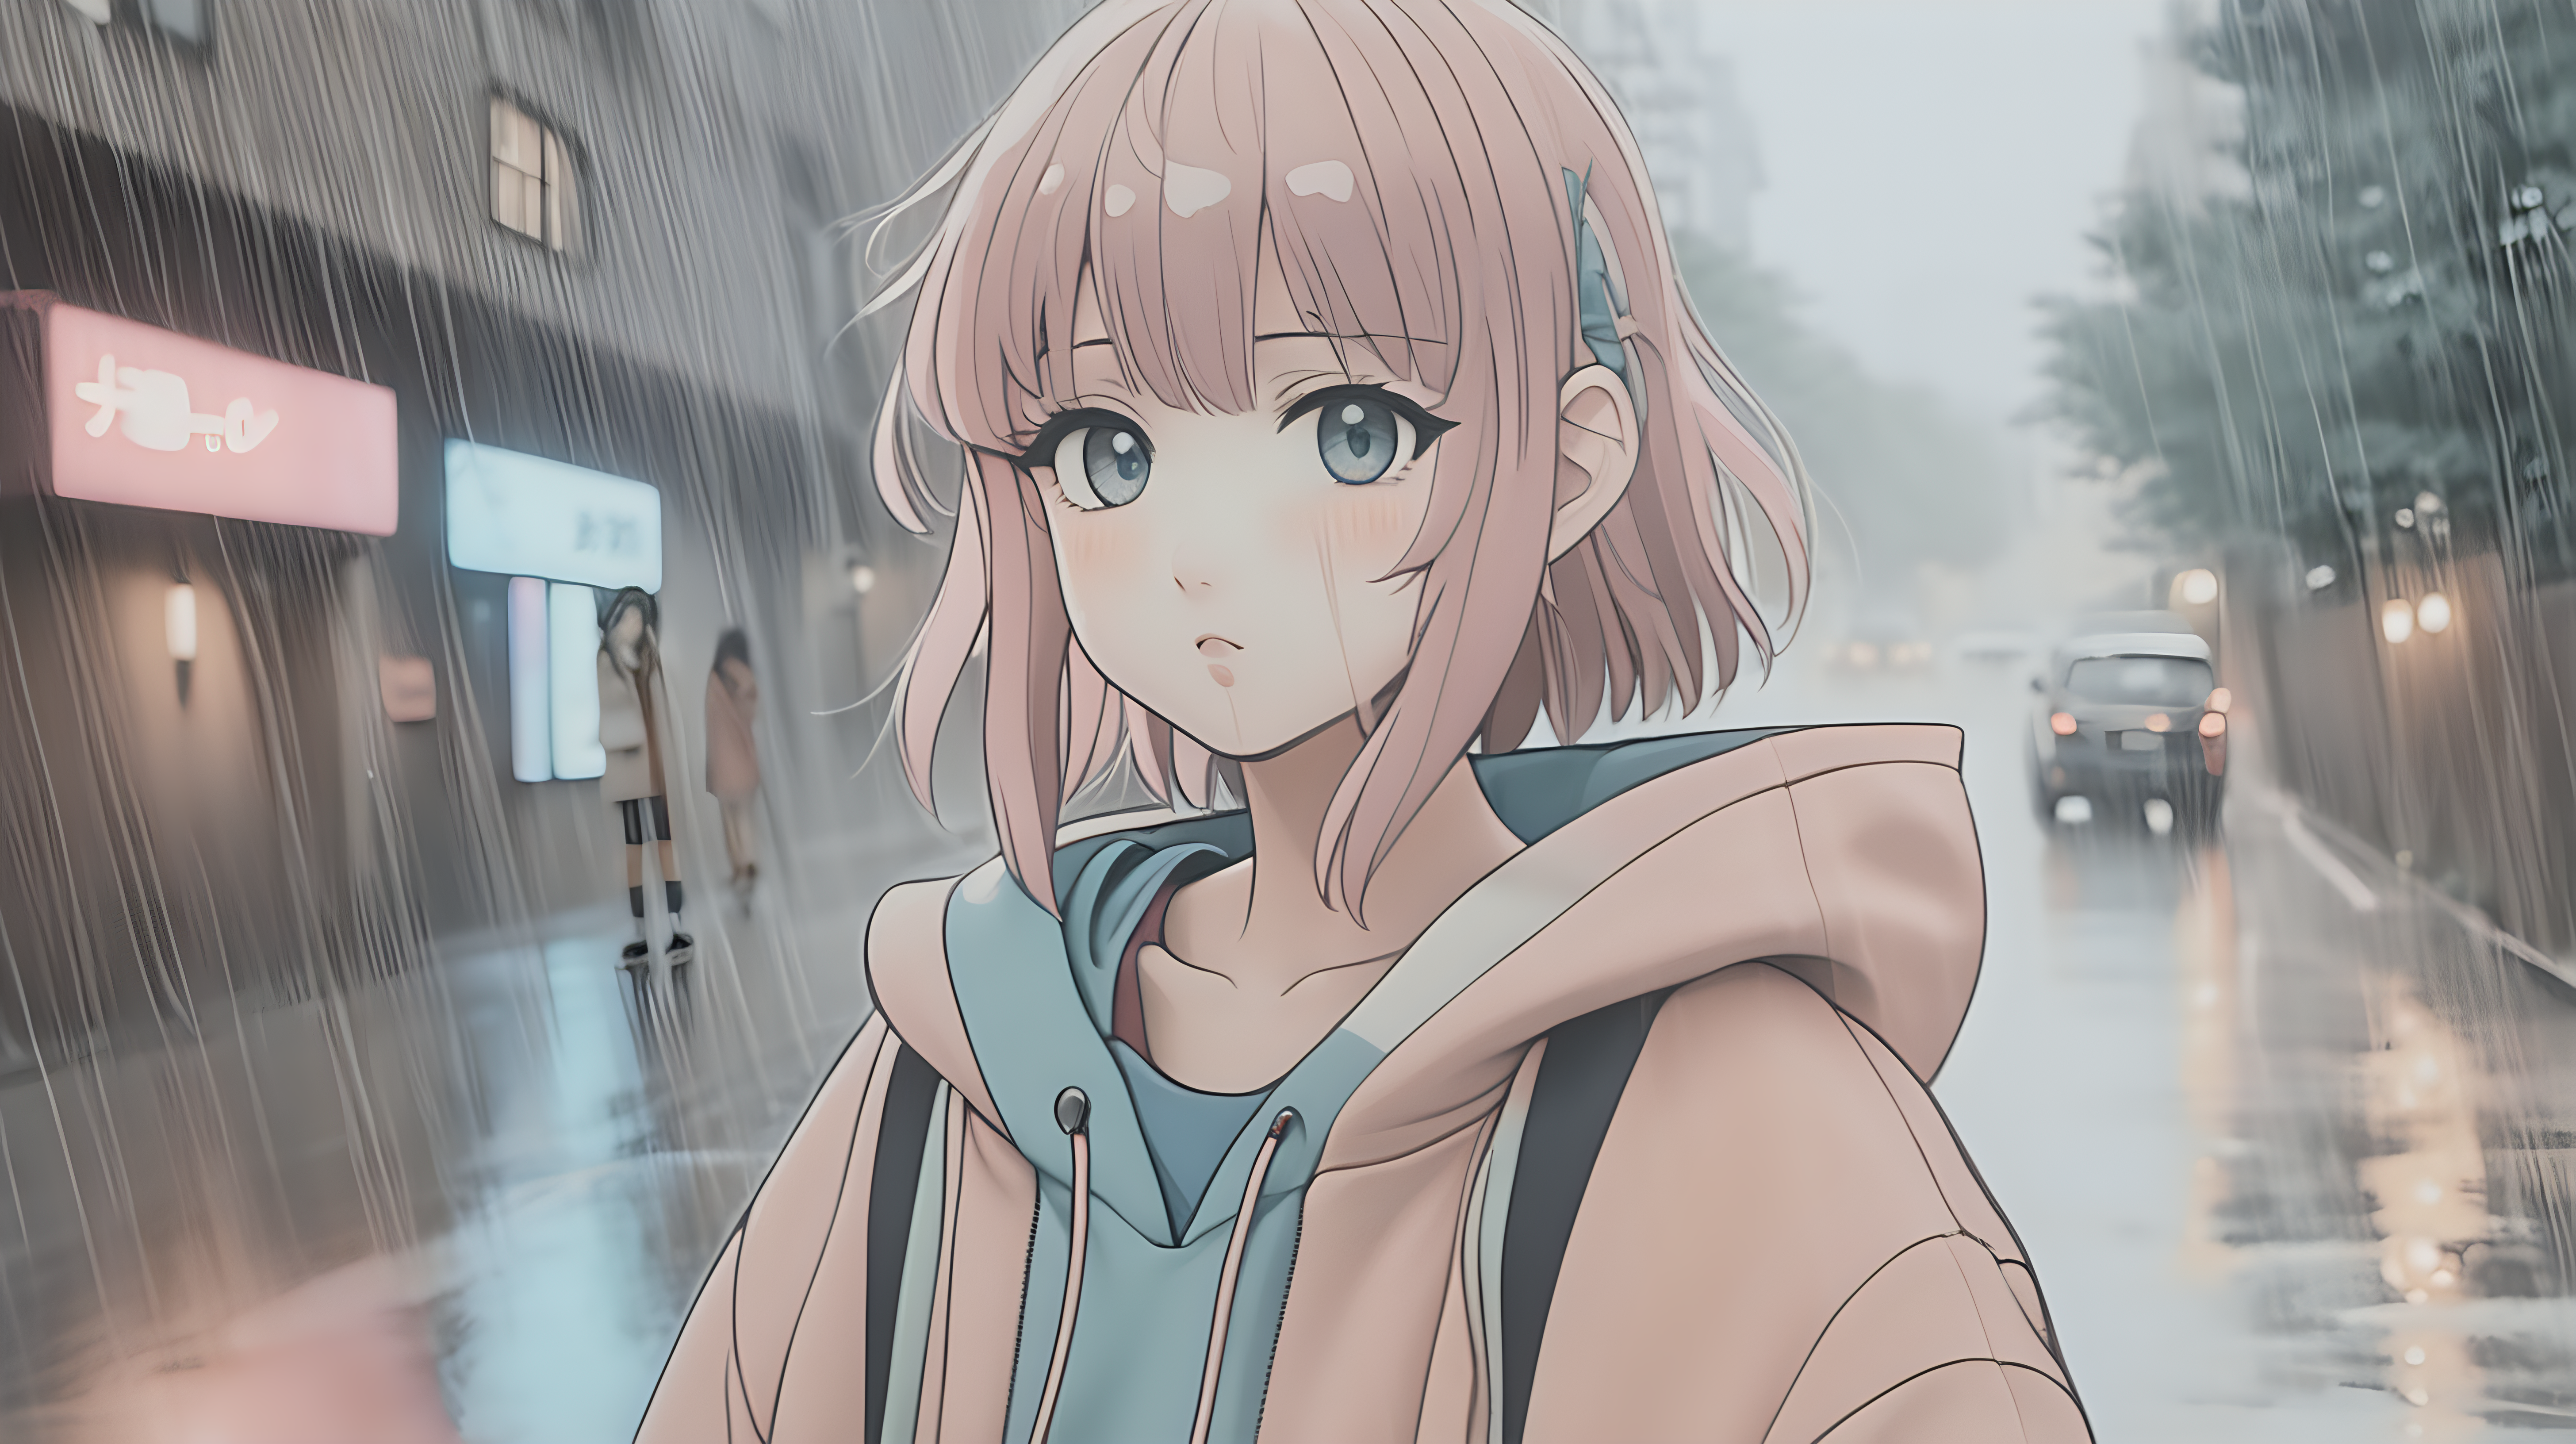 anime girl in the rain, muted pastel colors that look good on craft paper